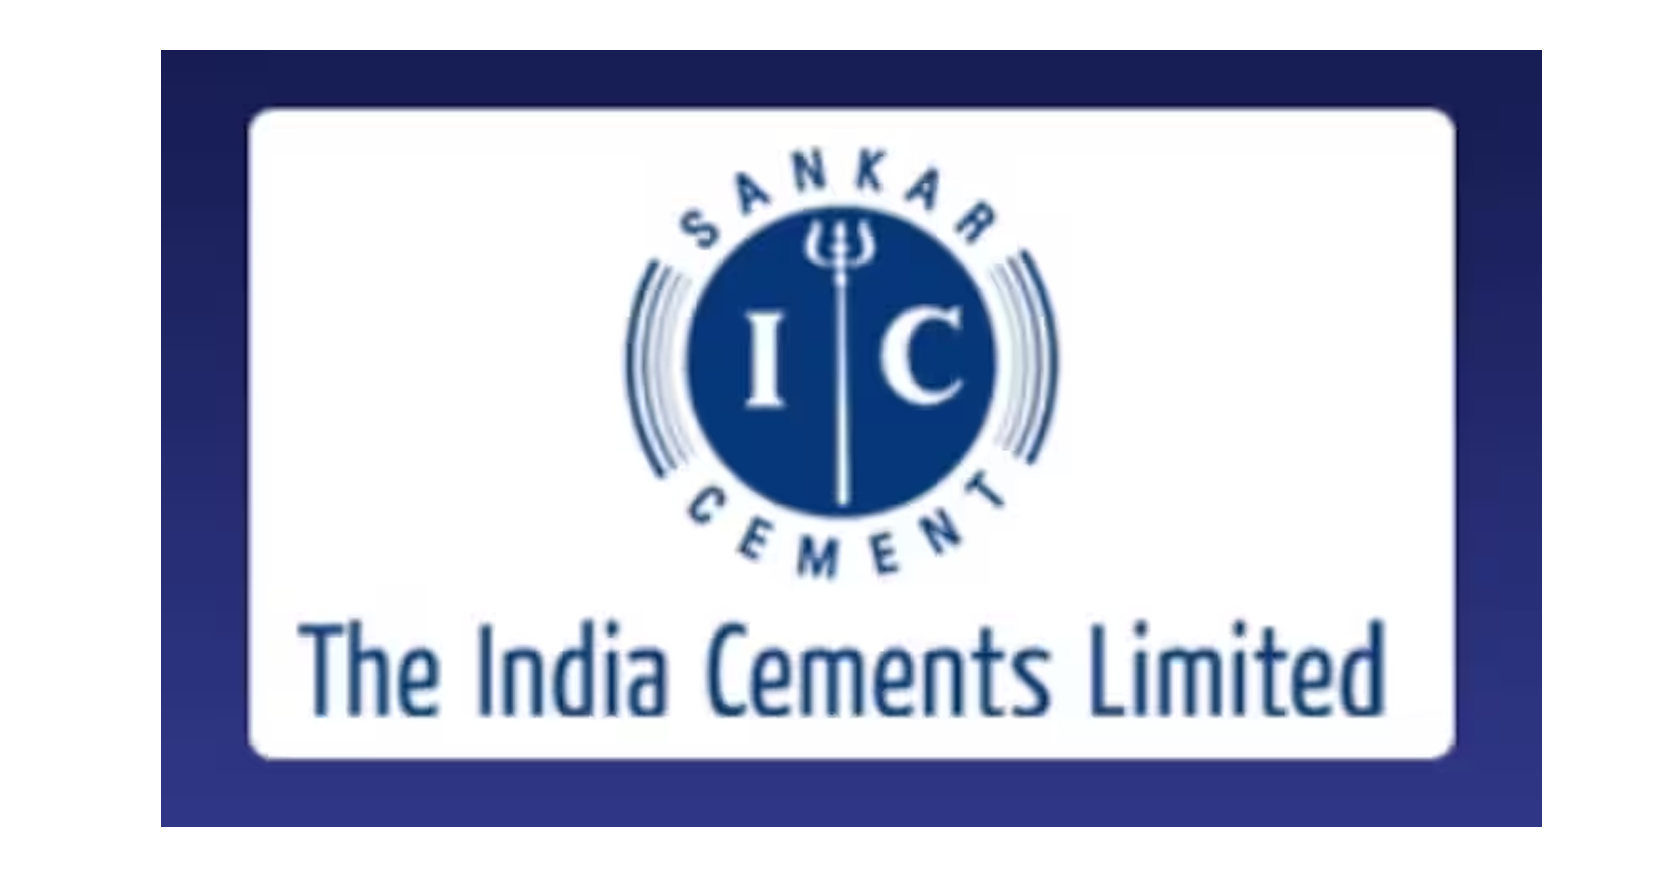 india-cements